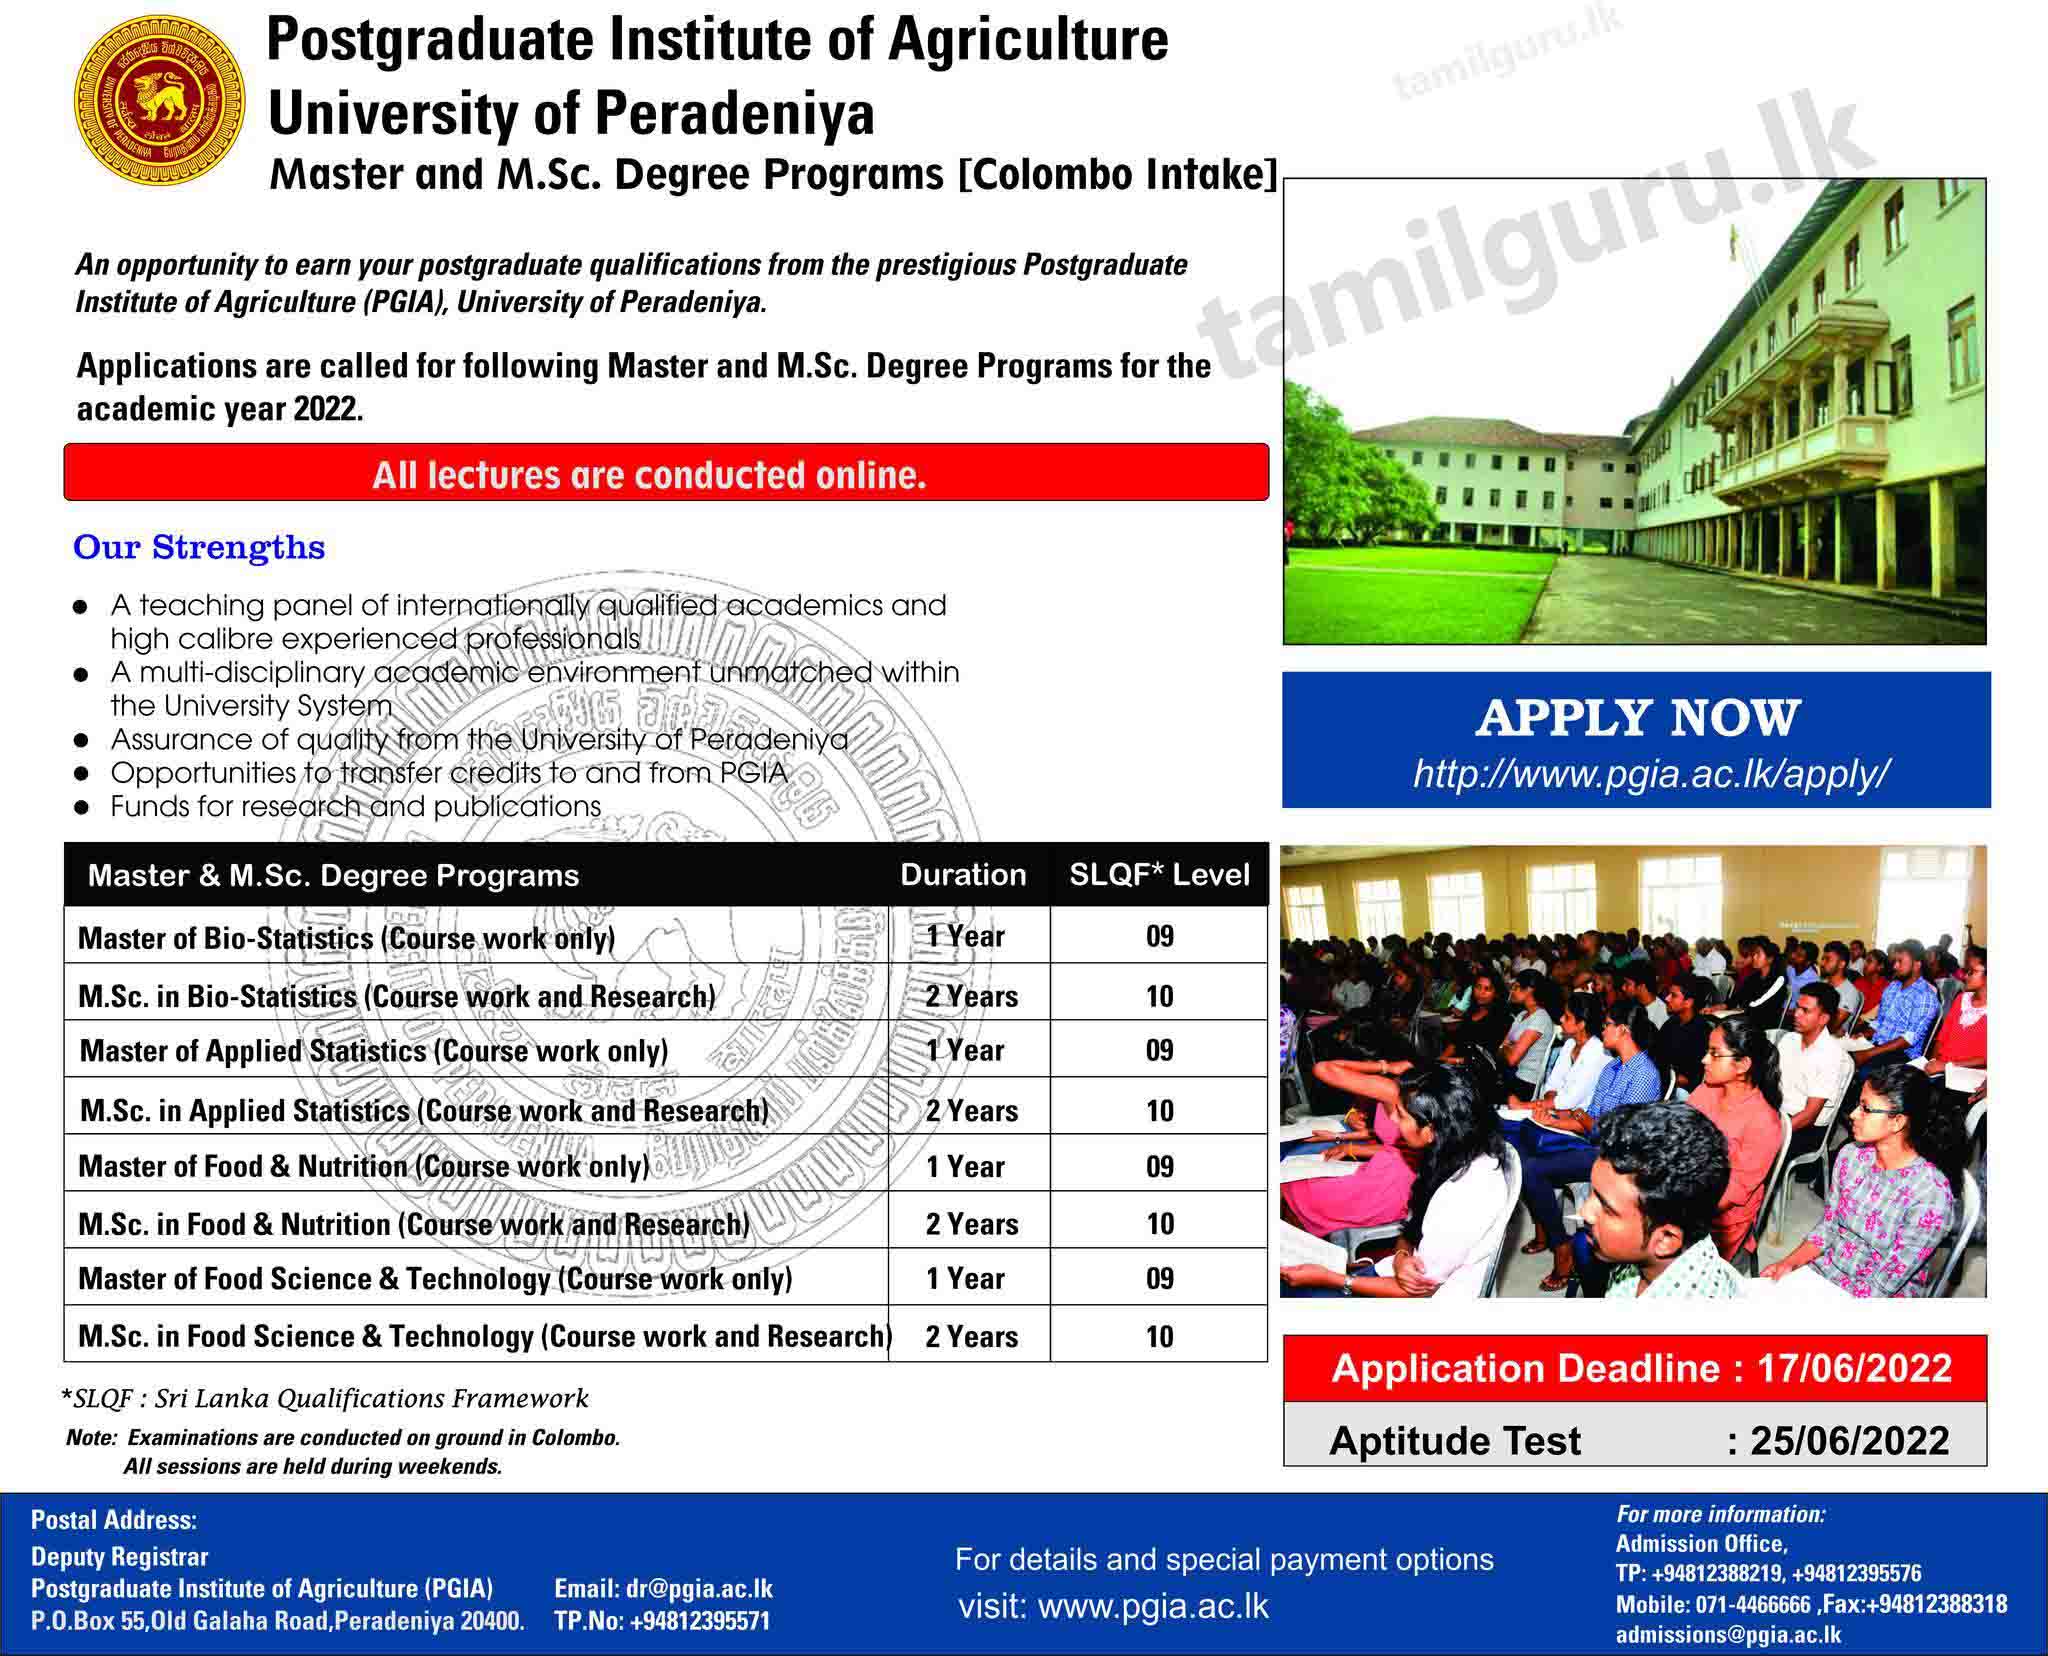 Calling Applications for Master and M.Sc. Degree Programmes 2022 (Colombo Intake) Conducted by Postgraduate Institute of Agriculture (PGIA), University of Peradeniya